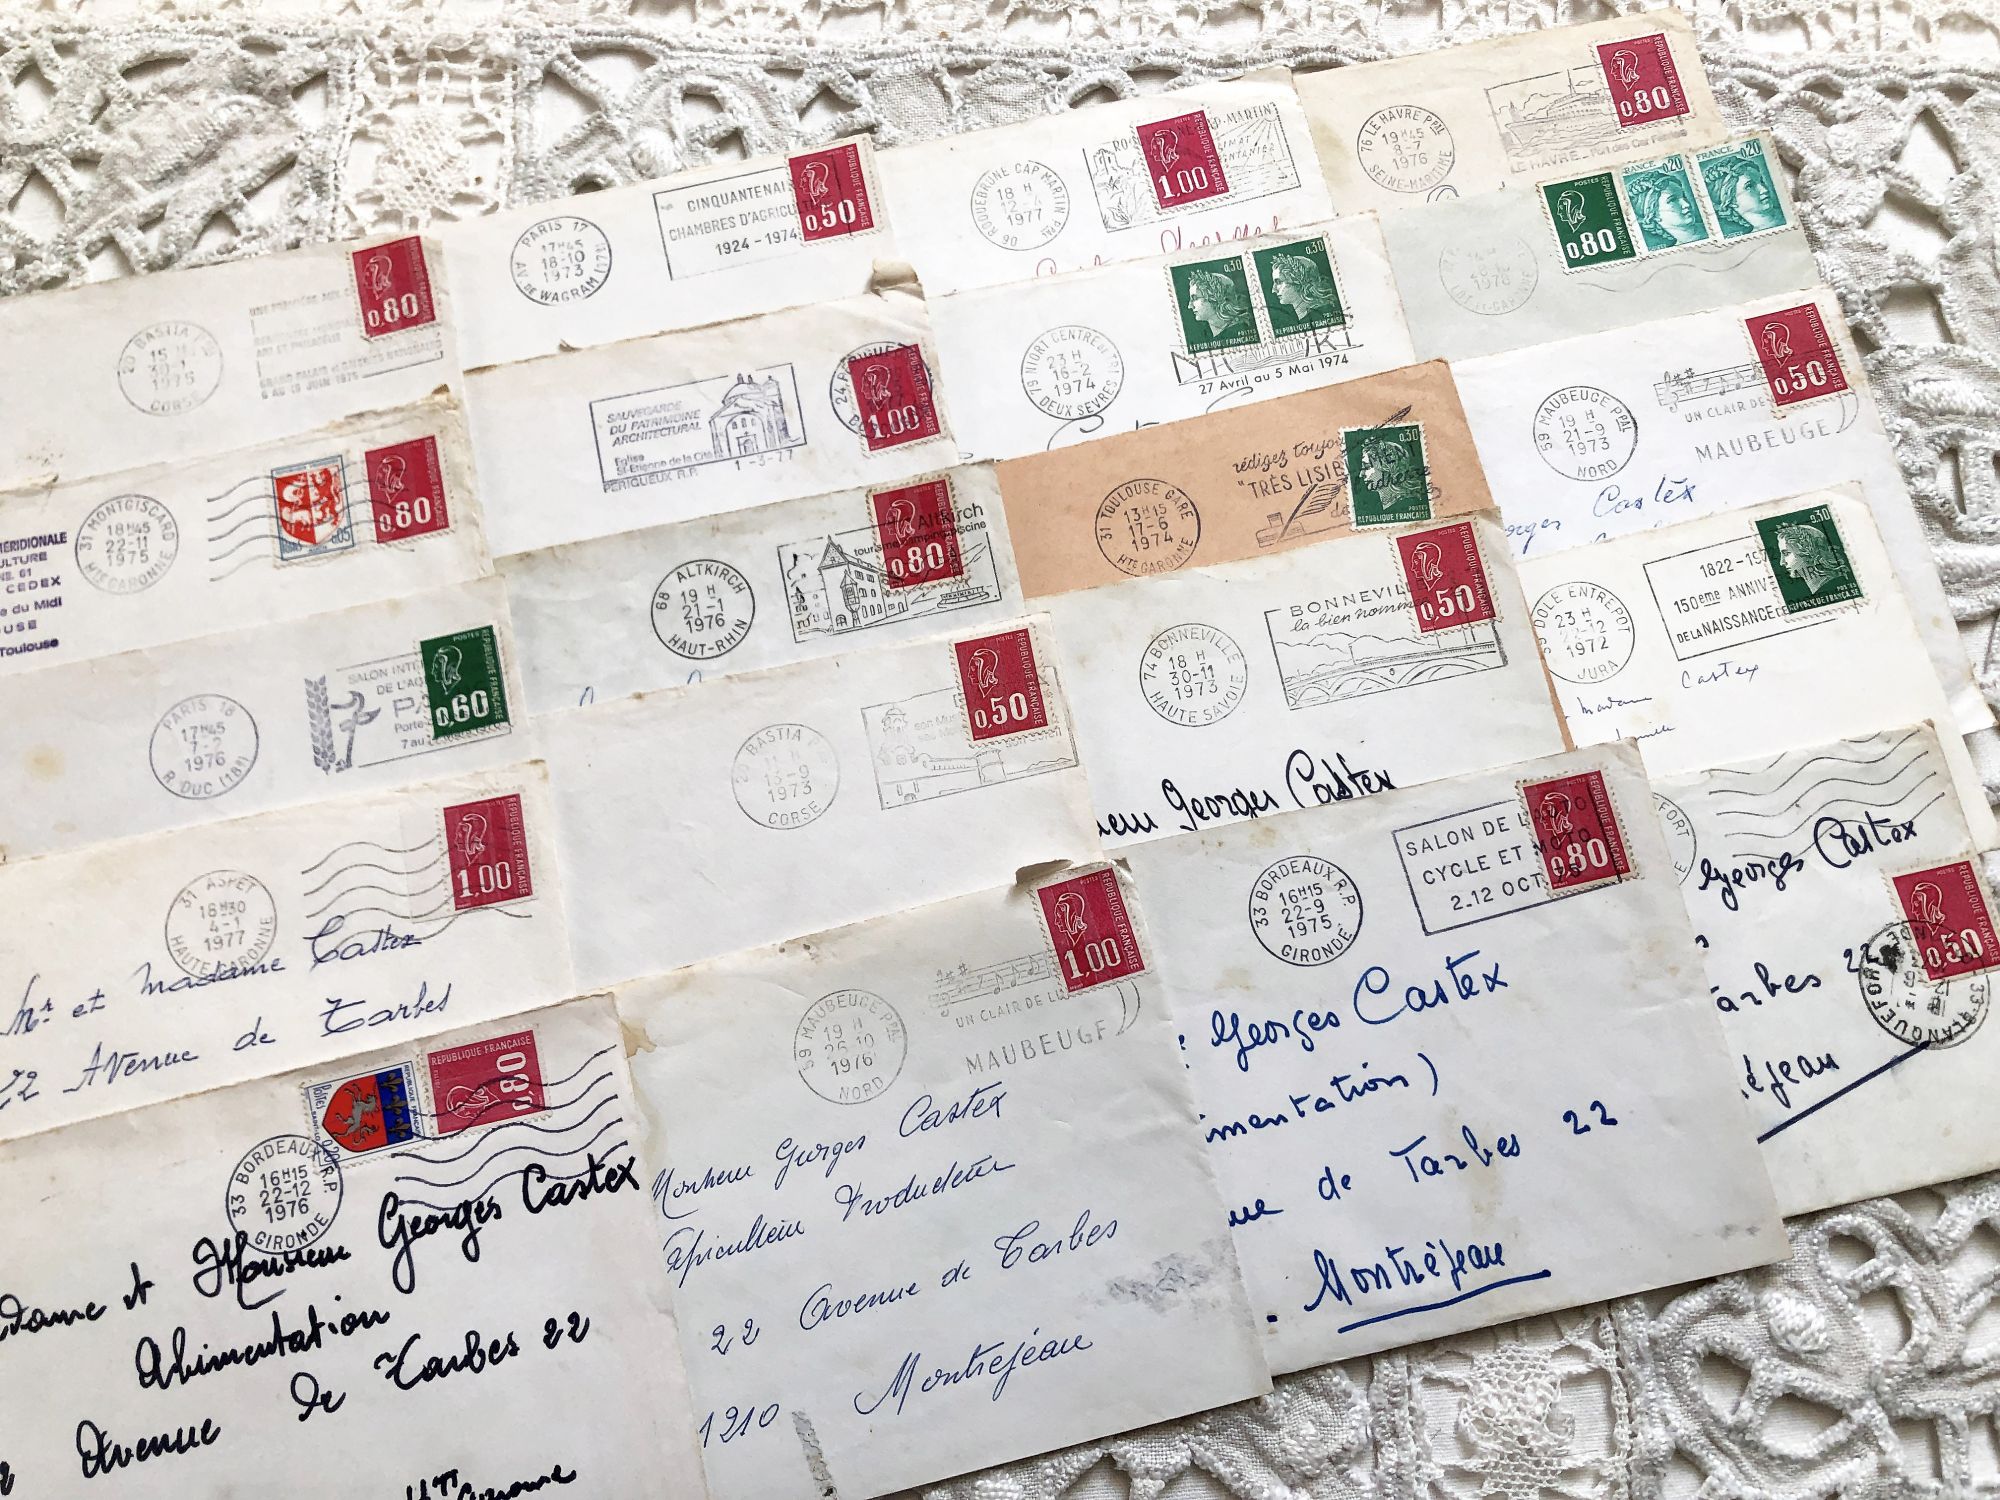 20 French envelopes from 1970s - Without letters inside